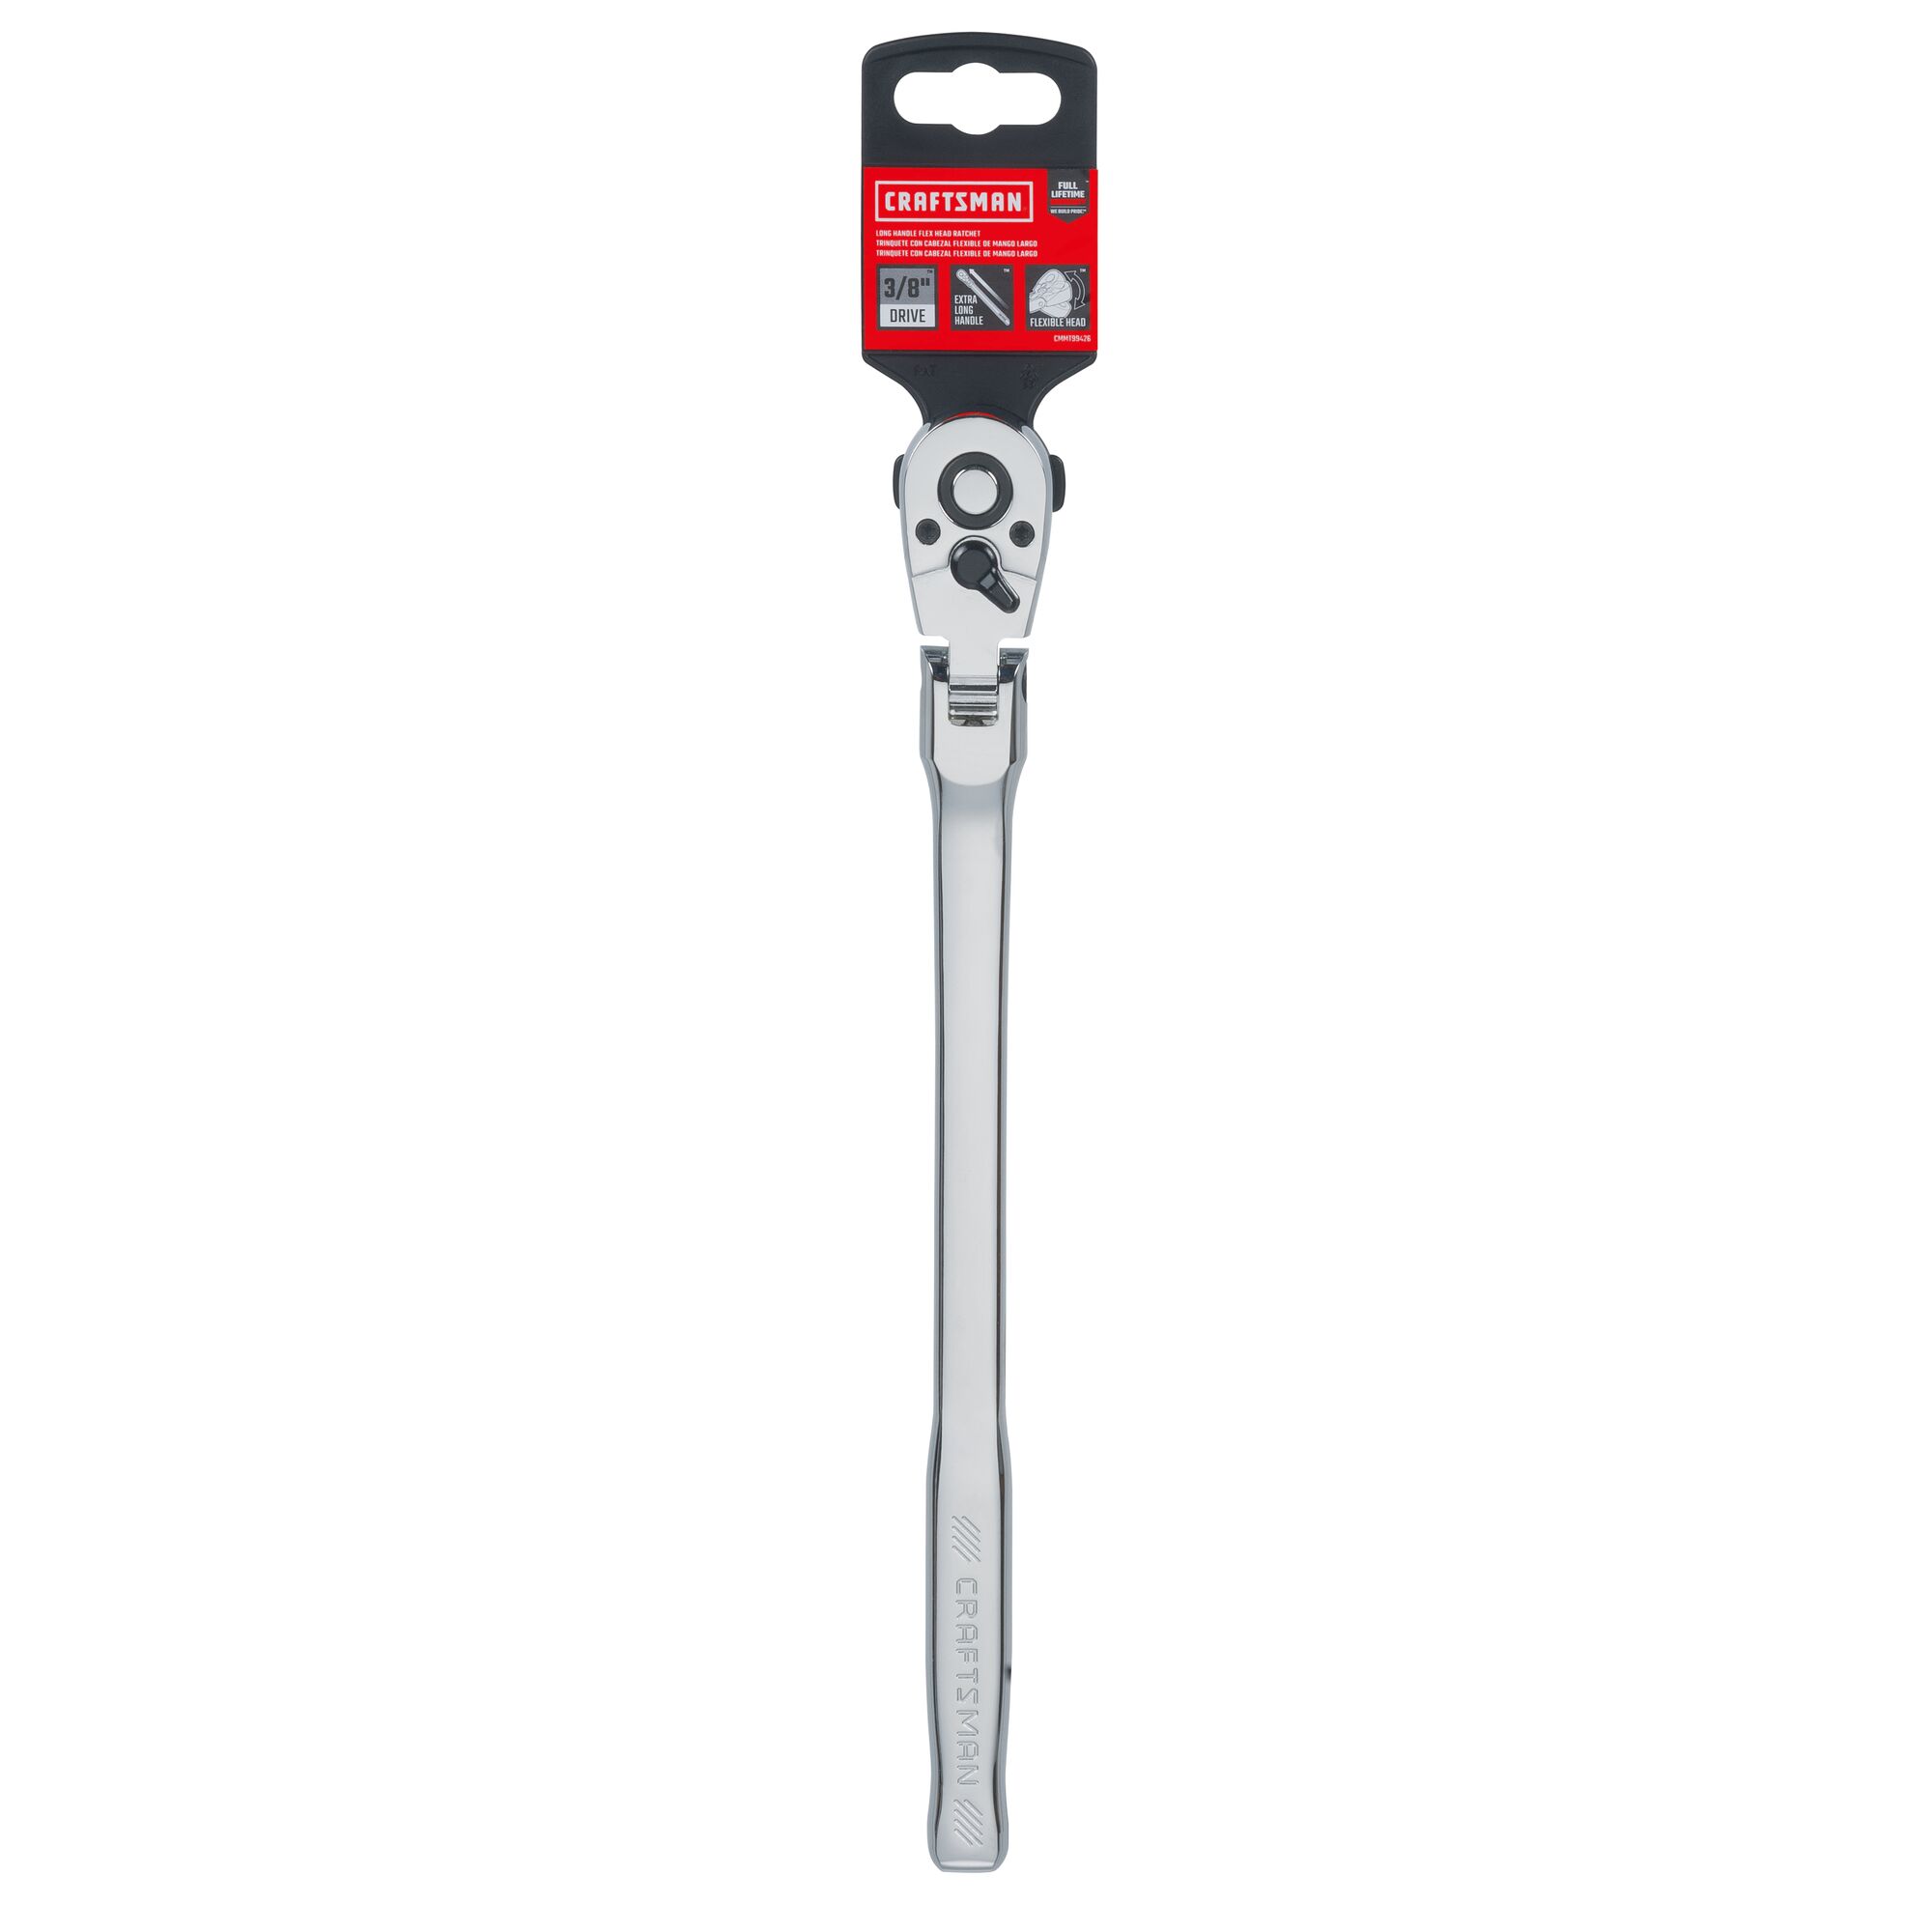 72 tooth 3 eighths inch drive quick release flexible head standard ratchet in plastic packaging.